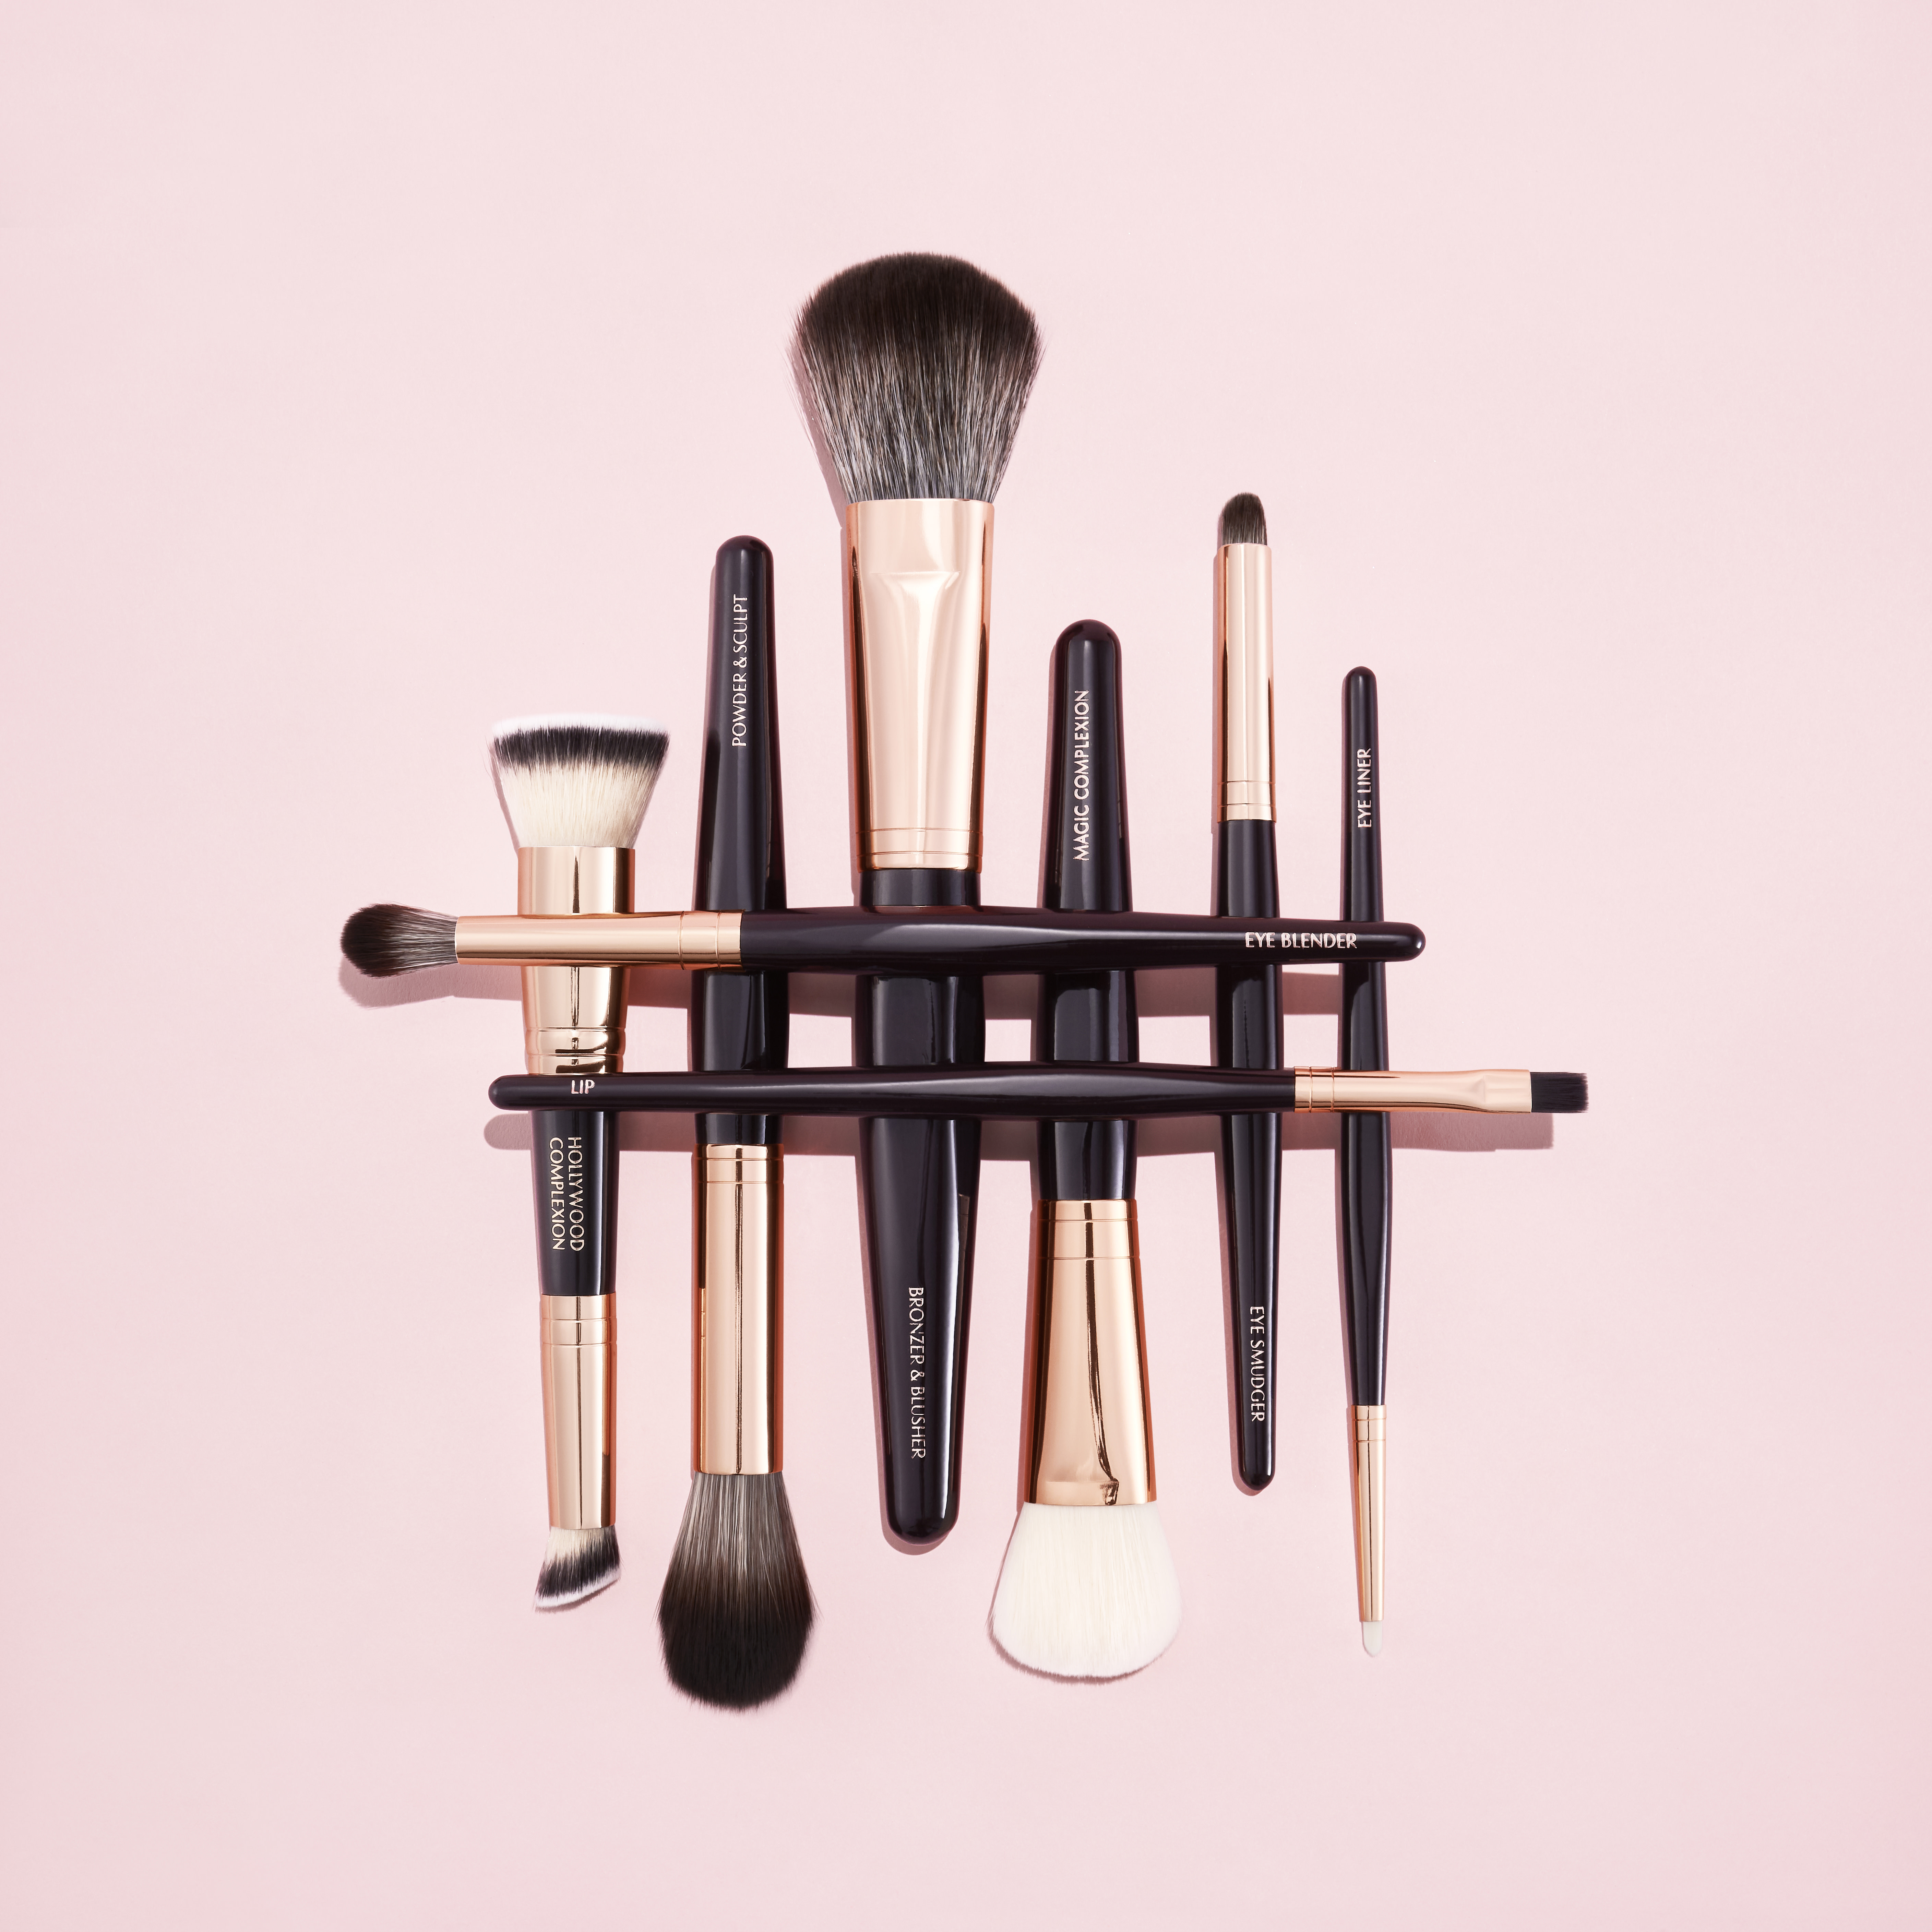 Charlotte's synthetic makeup brushes for the eyes and face